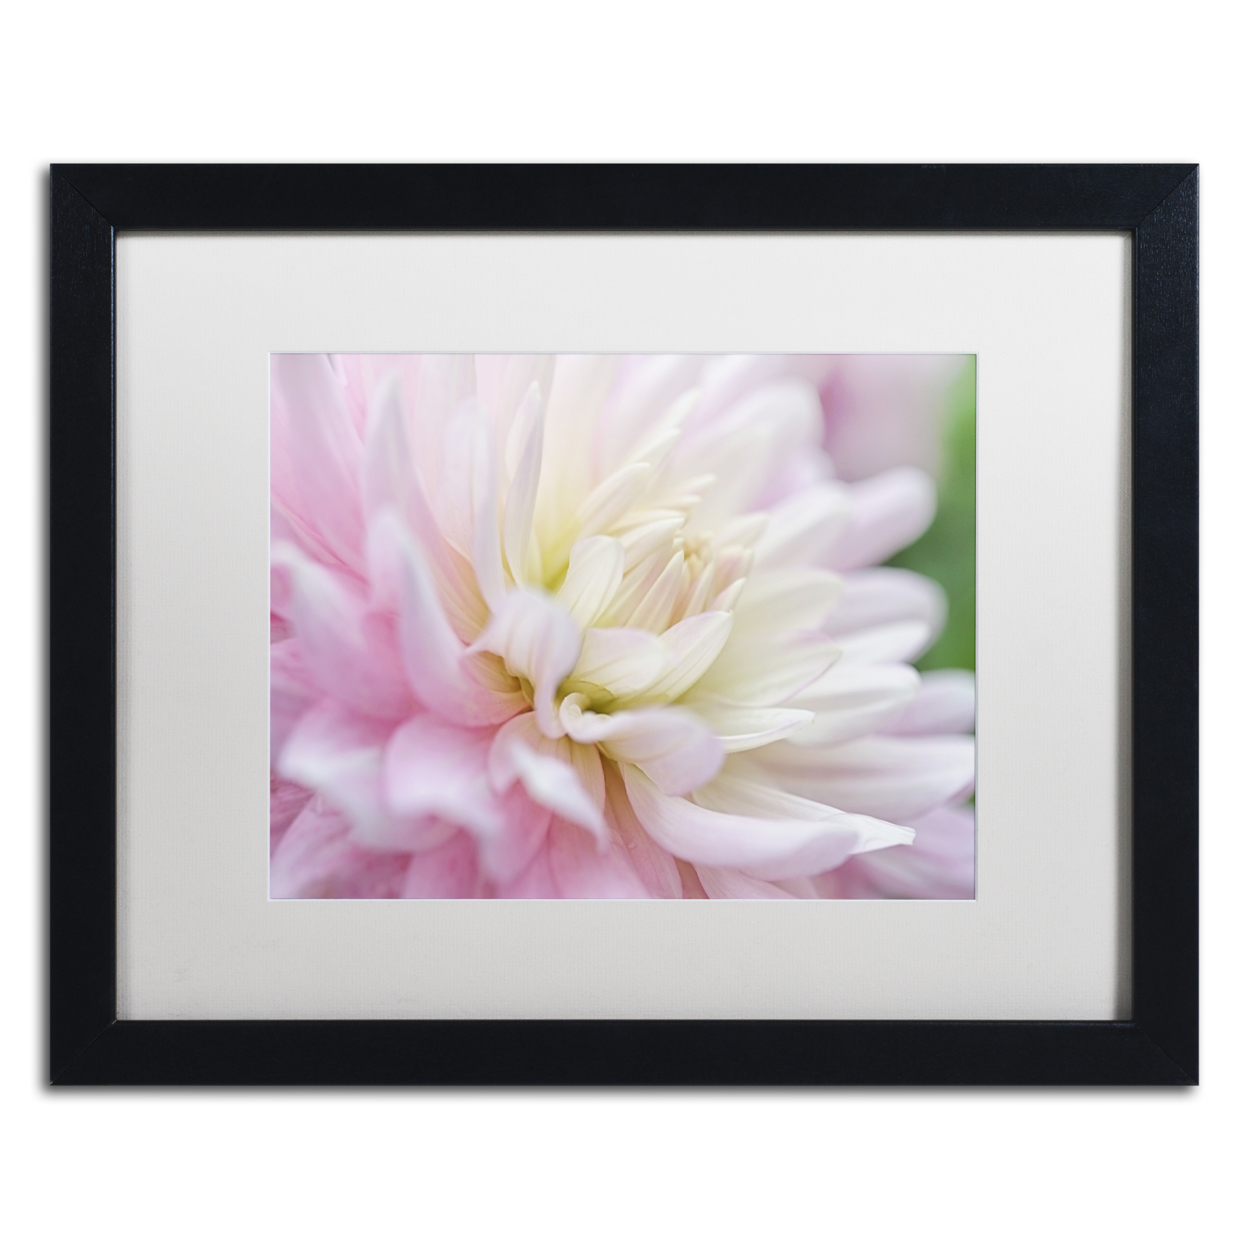 Cora Niele 'White And Pink Dahlia' Black Wooden Framed Art 18 X 22 Inches